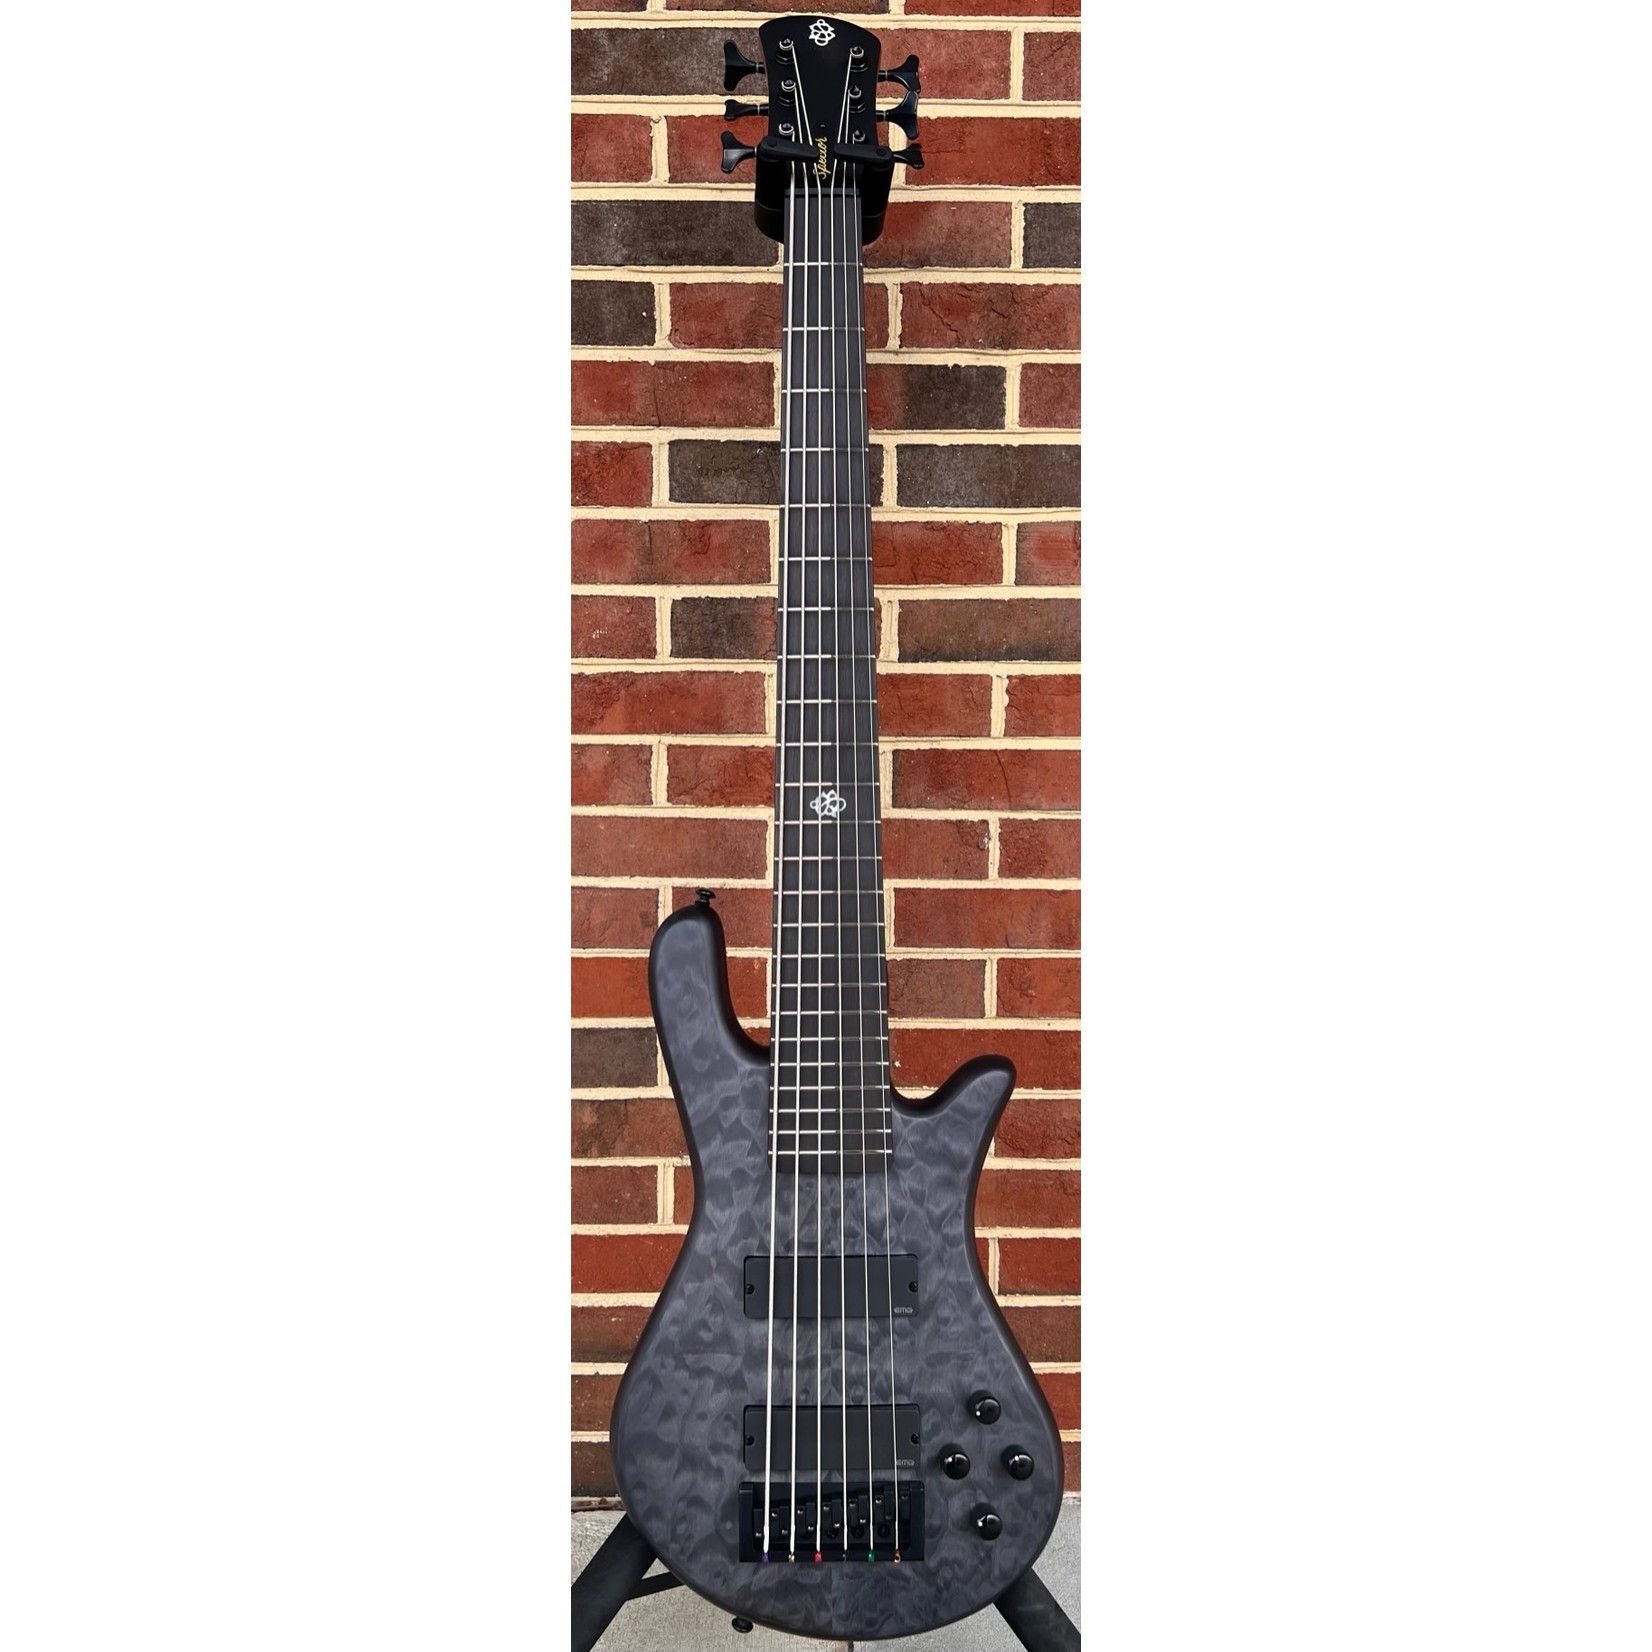 Spector Spector NS Pulse II 6-String, Black Stain Matte, Quilted Maple Top, Swamp Ash Body, Roasted Maple Neck, Macassar Ebony Fretboard, Gig Bag, SN# W211985